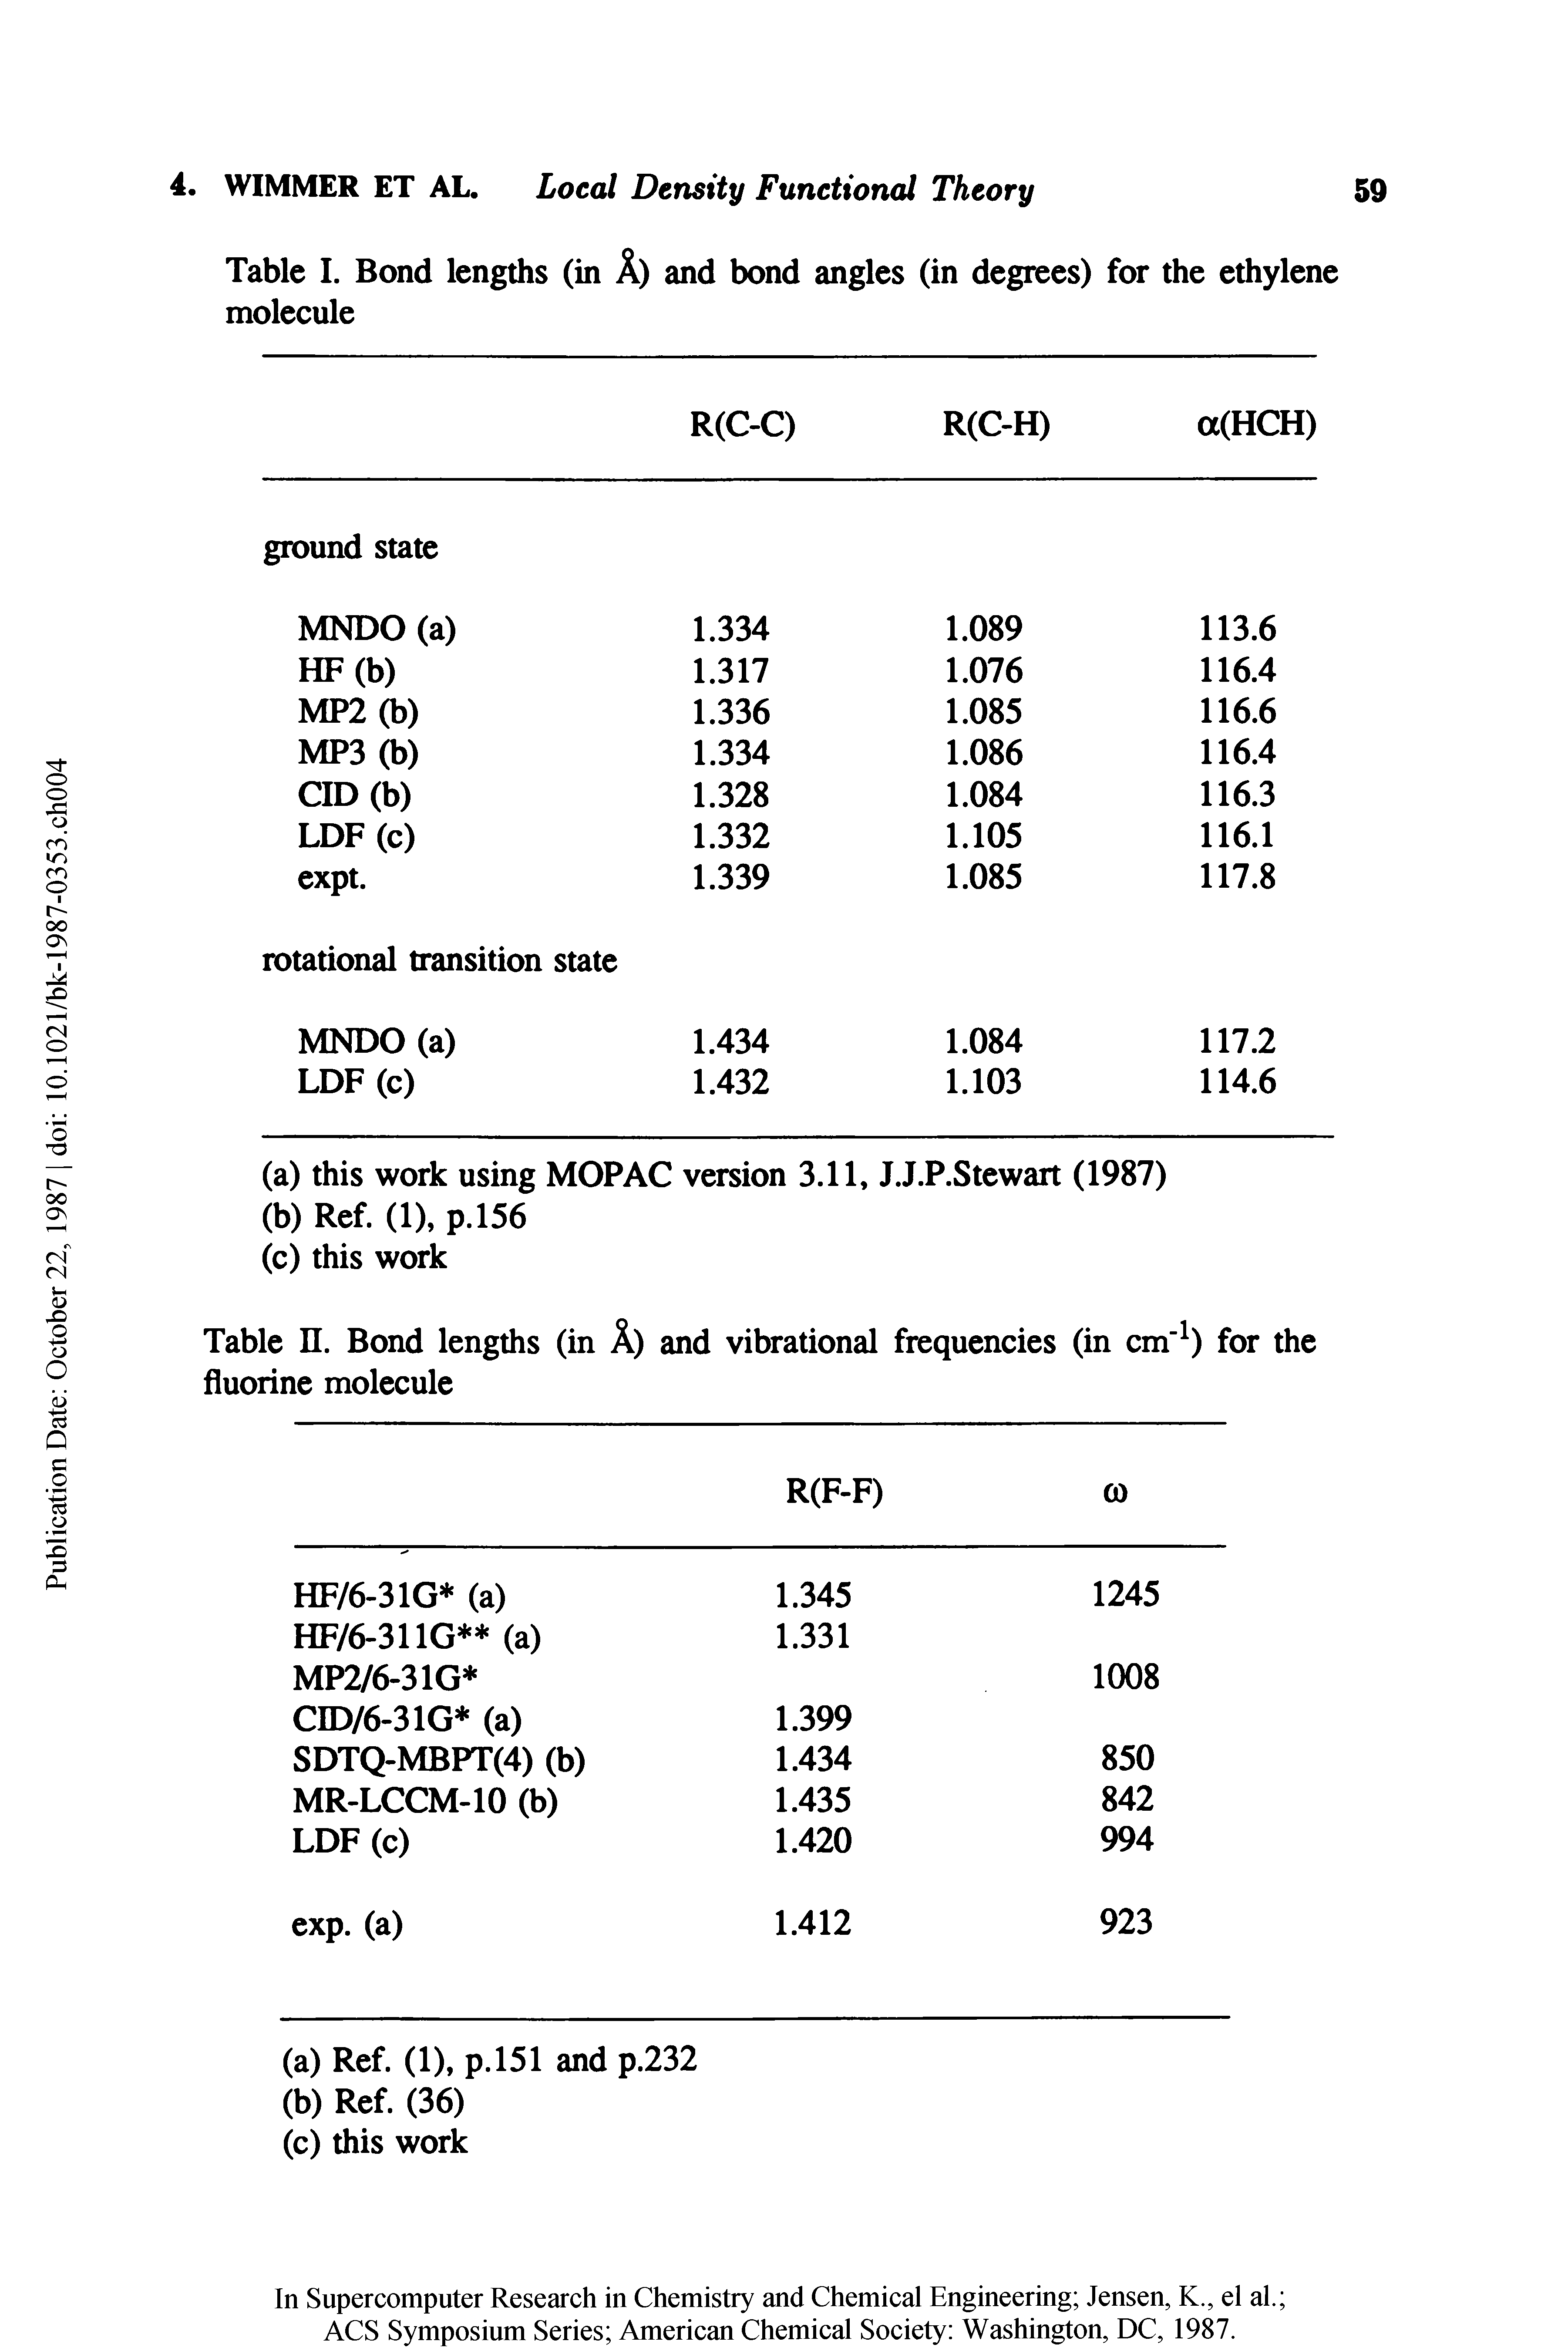 Table I. Bond lengths (in A) and bond angles (in degrees) for the ethylene molecule...